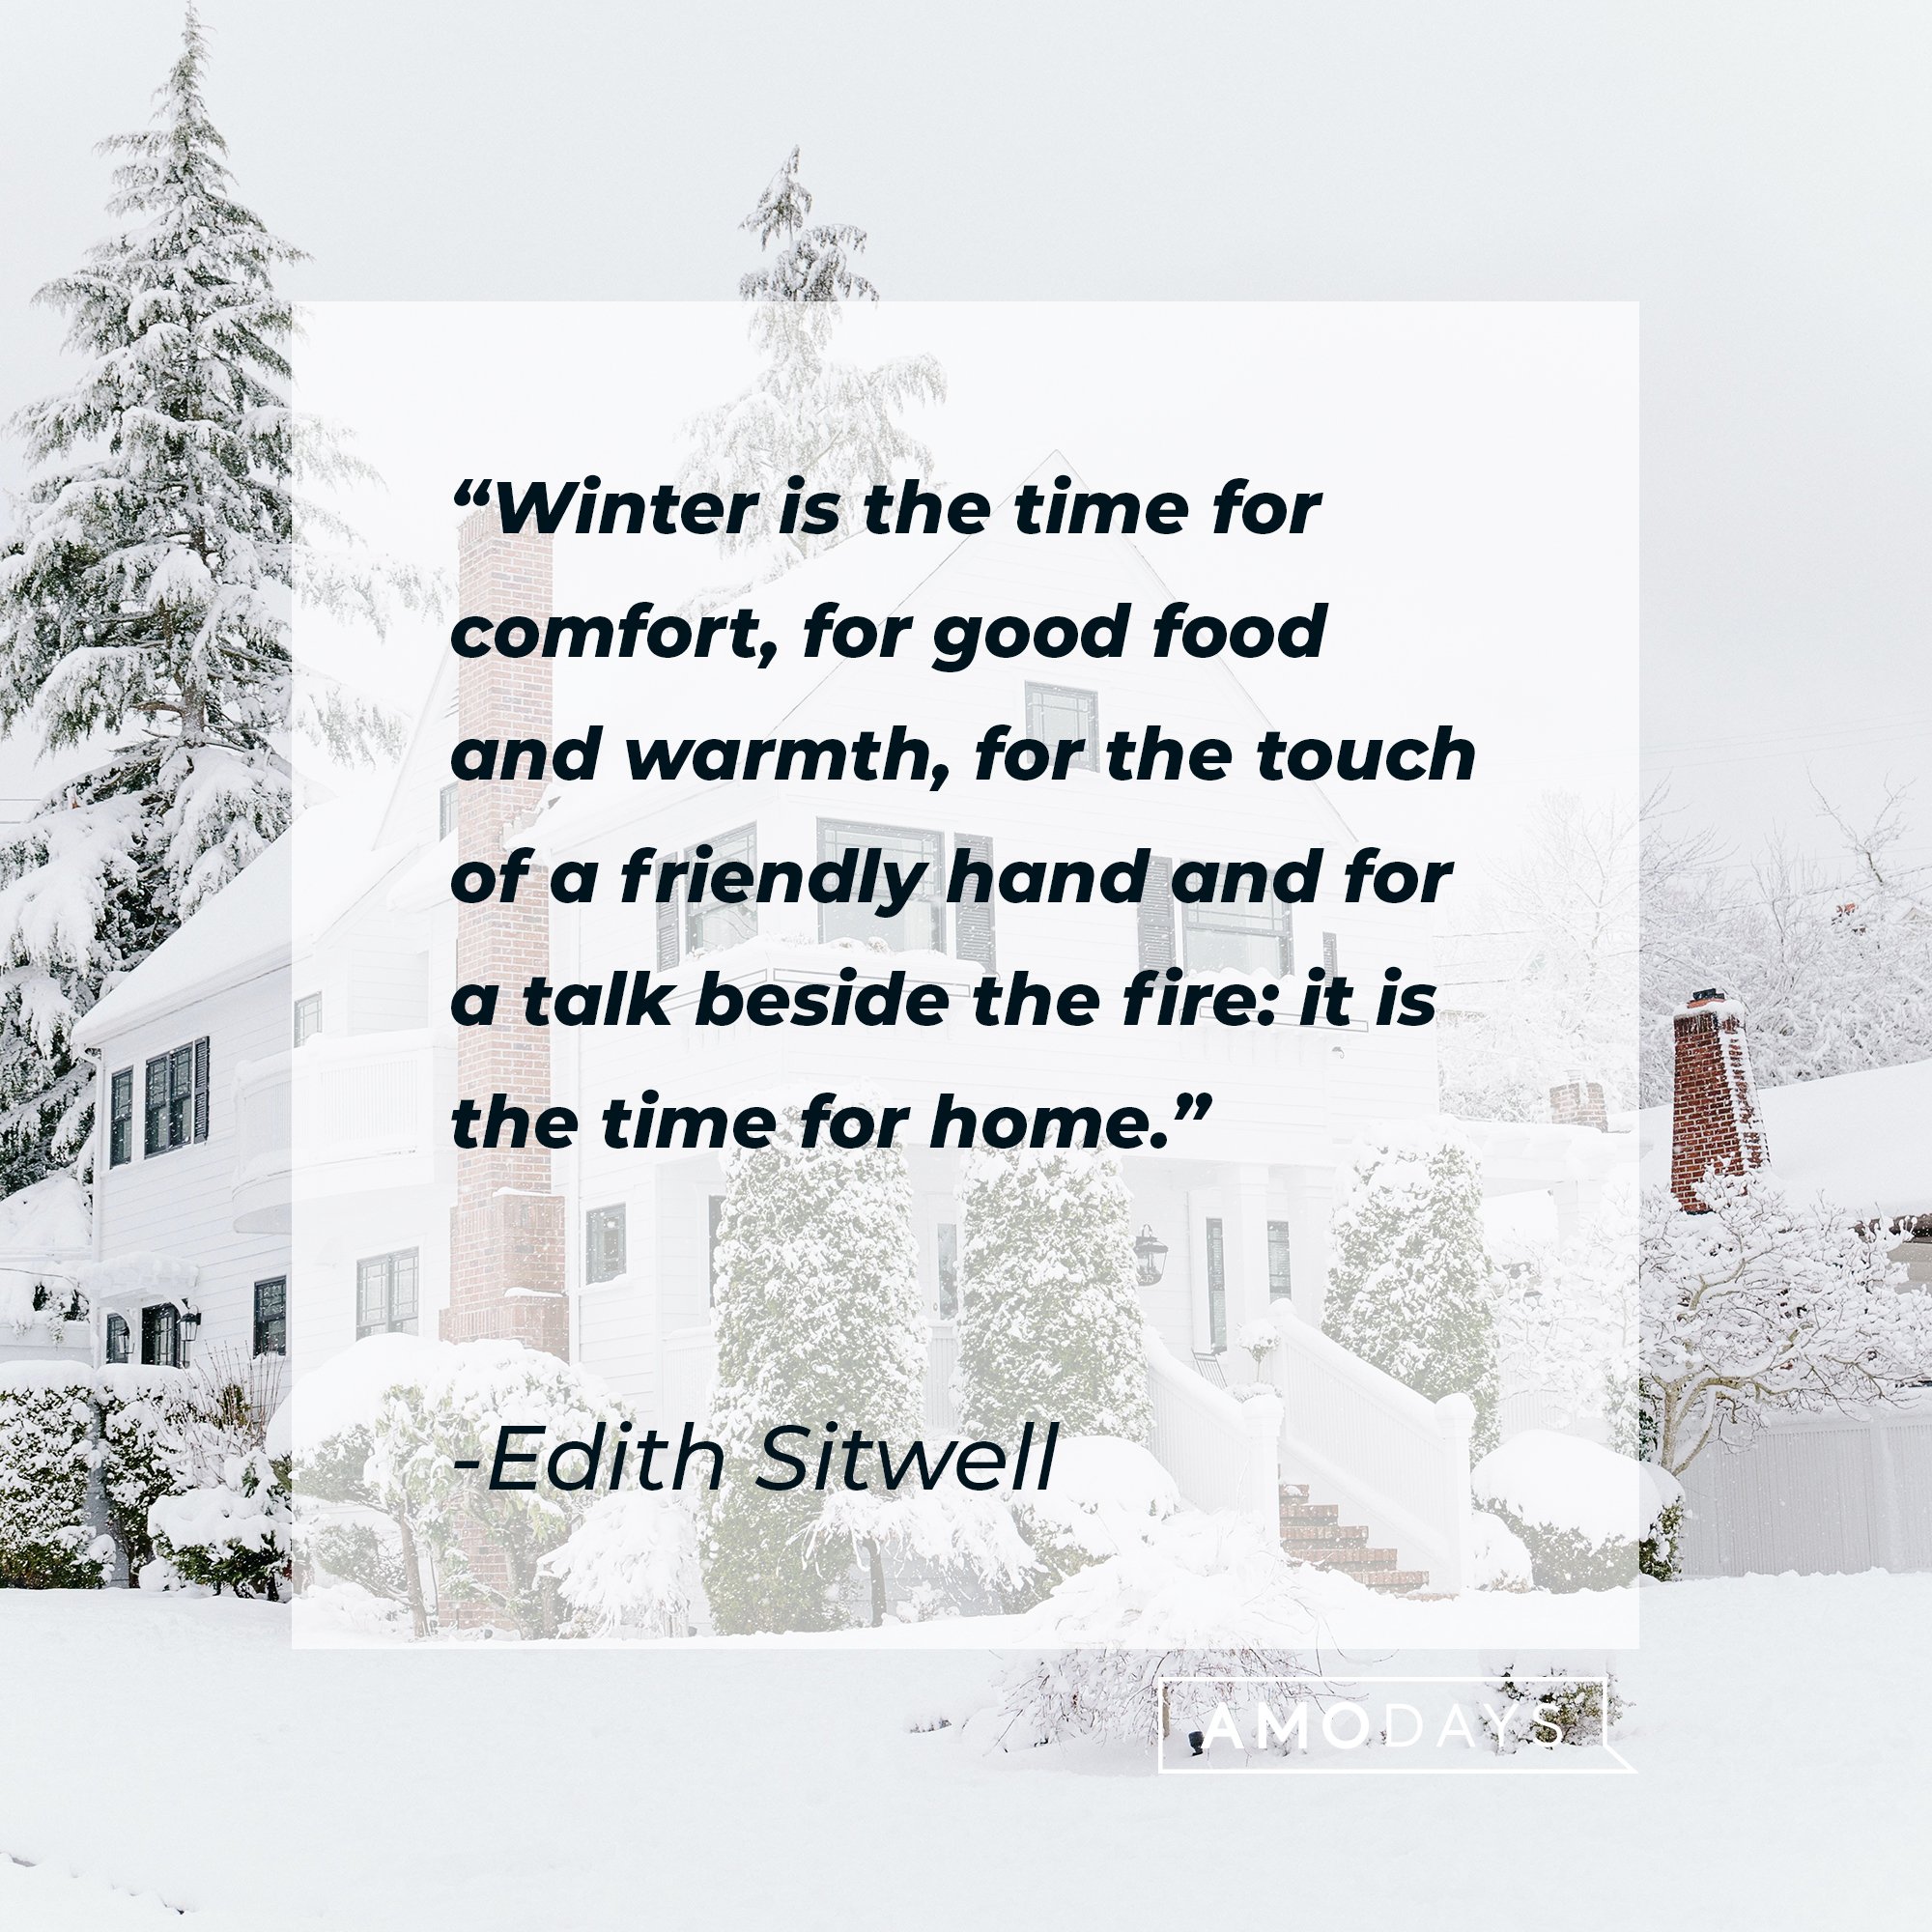 Edith Sitwell's quote: "Winter is the time for comfort, for good food and warmth, for the touch of a friendly hand and for a talk beside the fire: it is the time for home." | Image: AmoDays